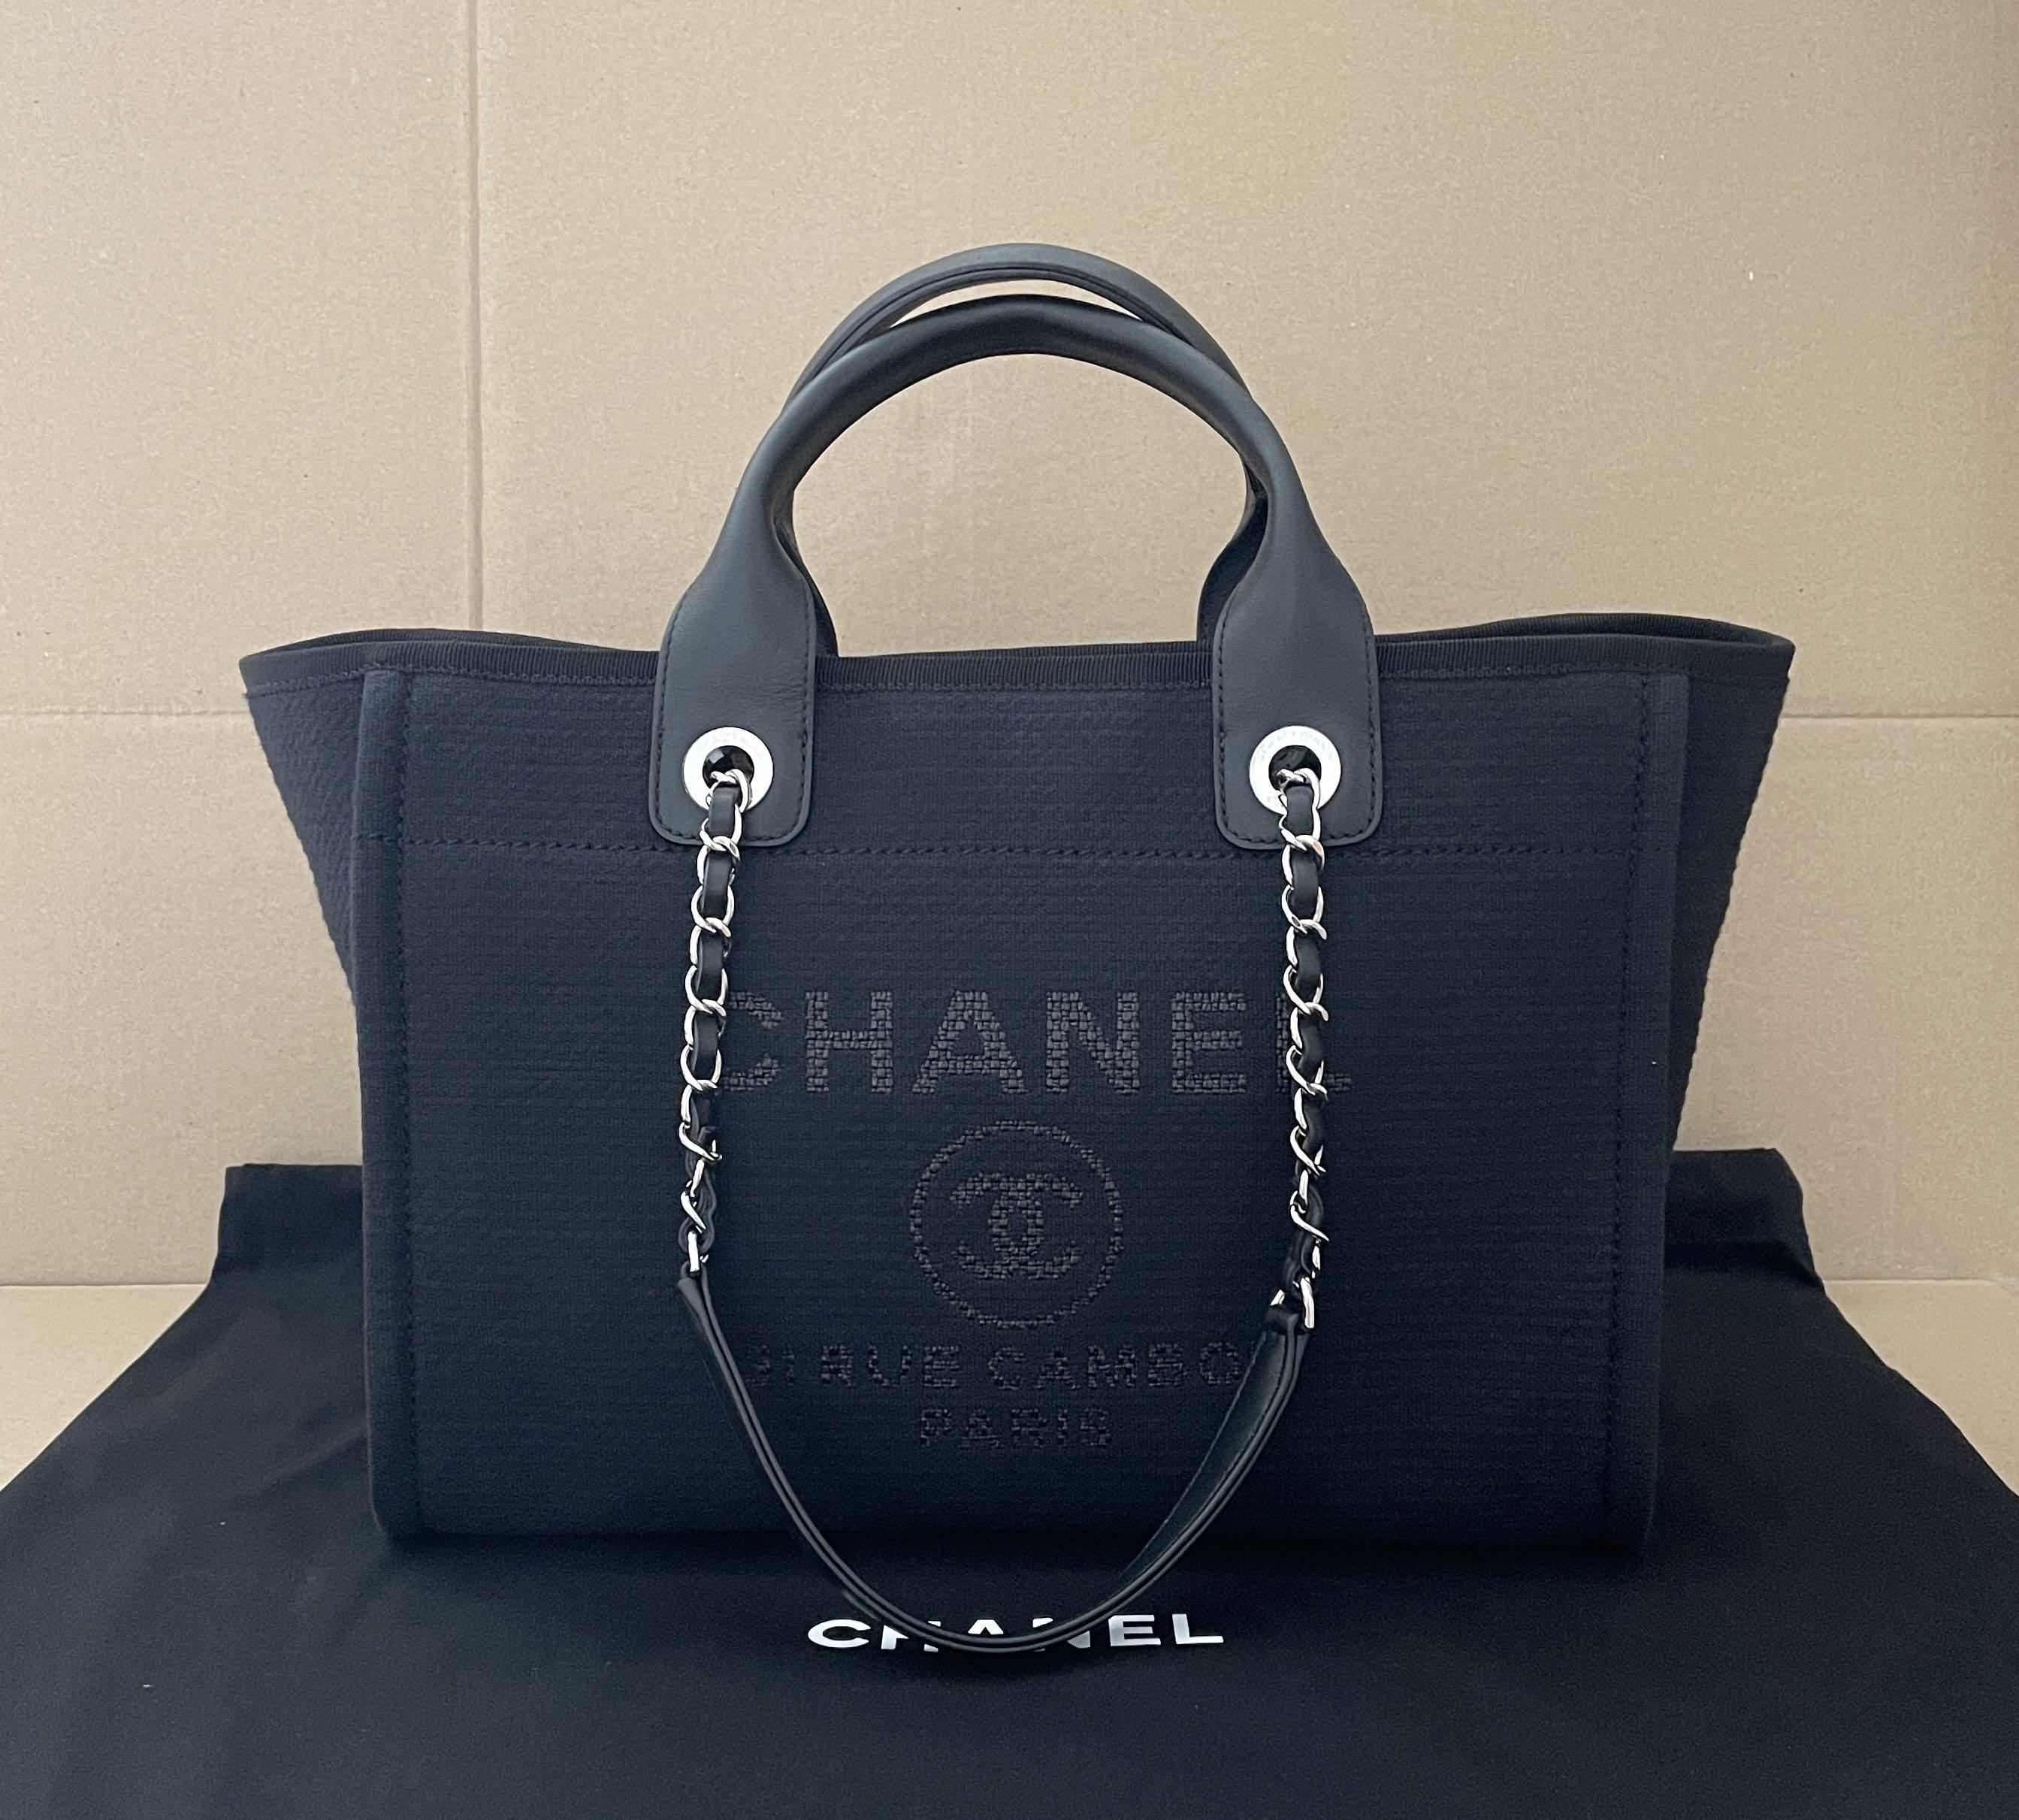 Chanel Deauville Tote - IMMACULATE dust bag, shopper bag